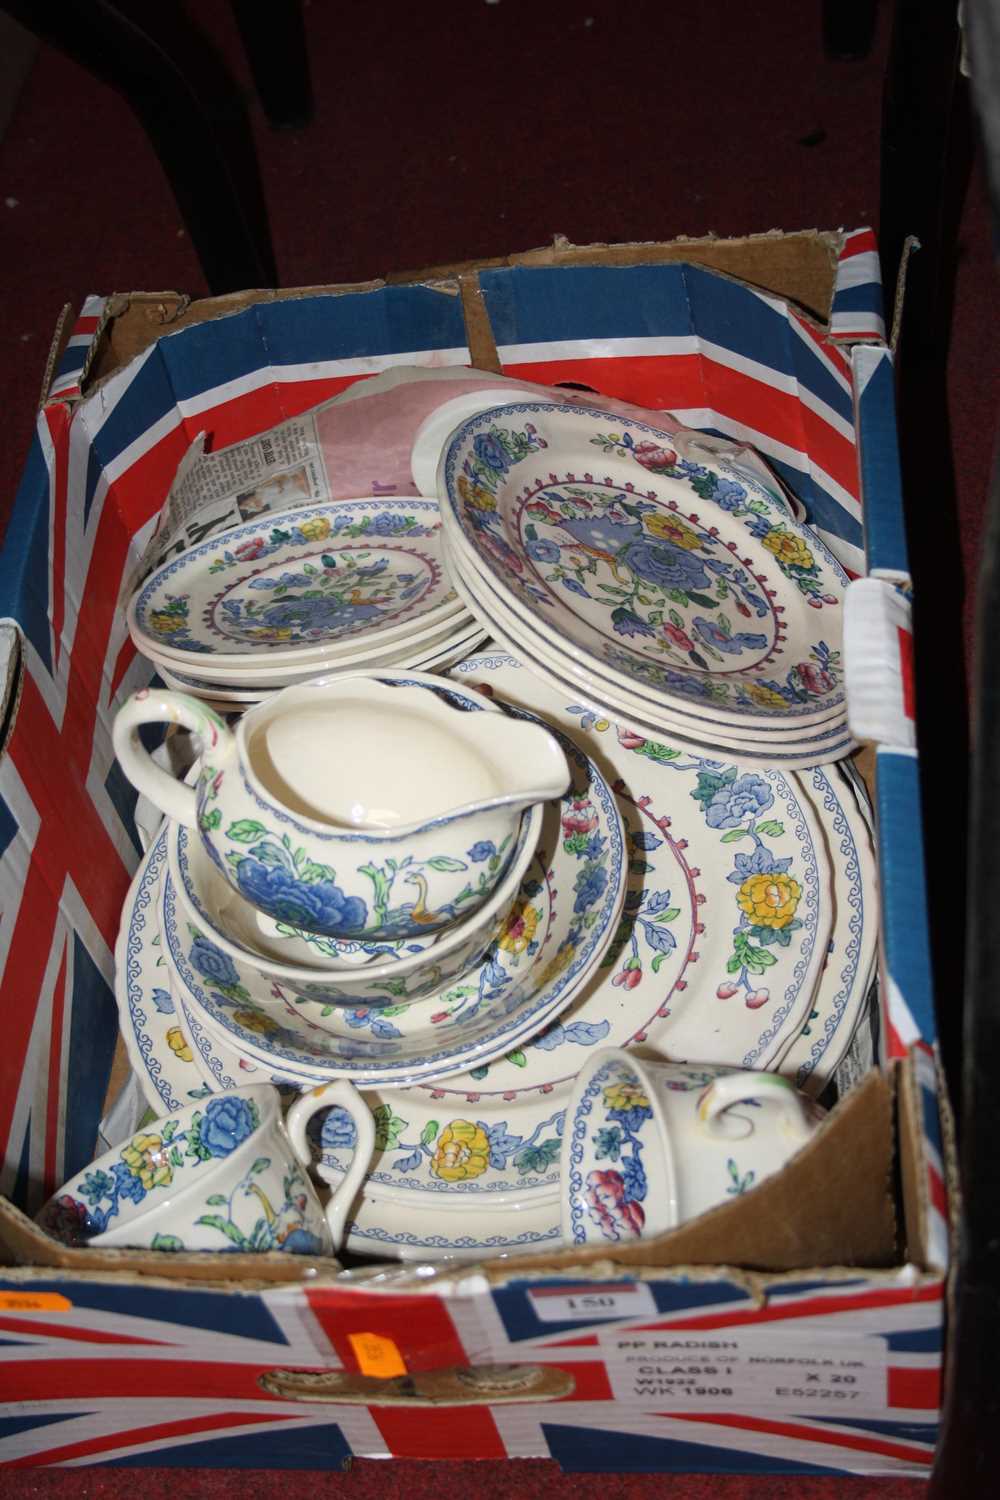 A Masons Ironstone part dinner and tea service in the Regency pattern